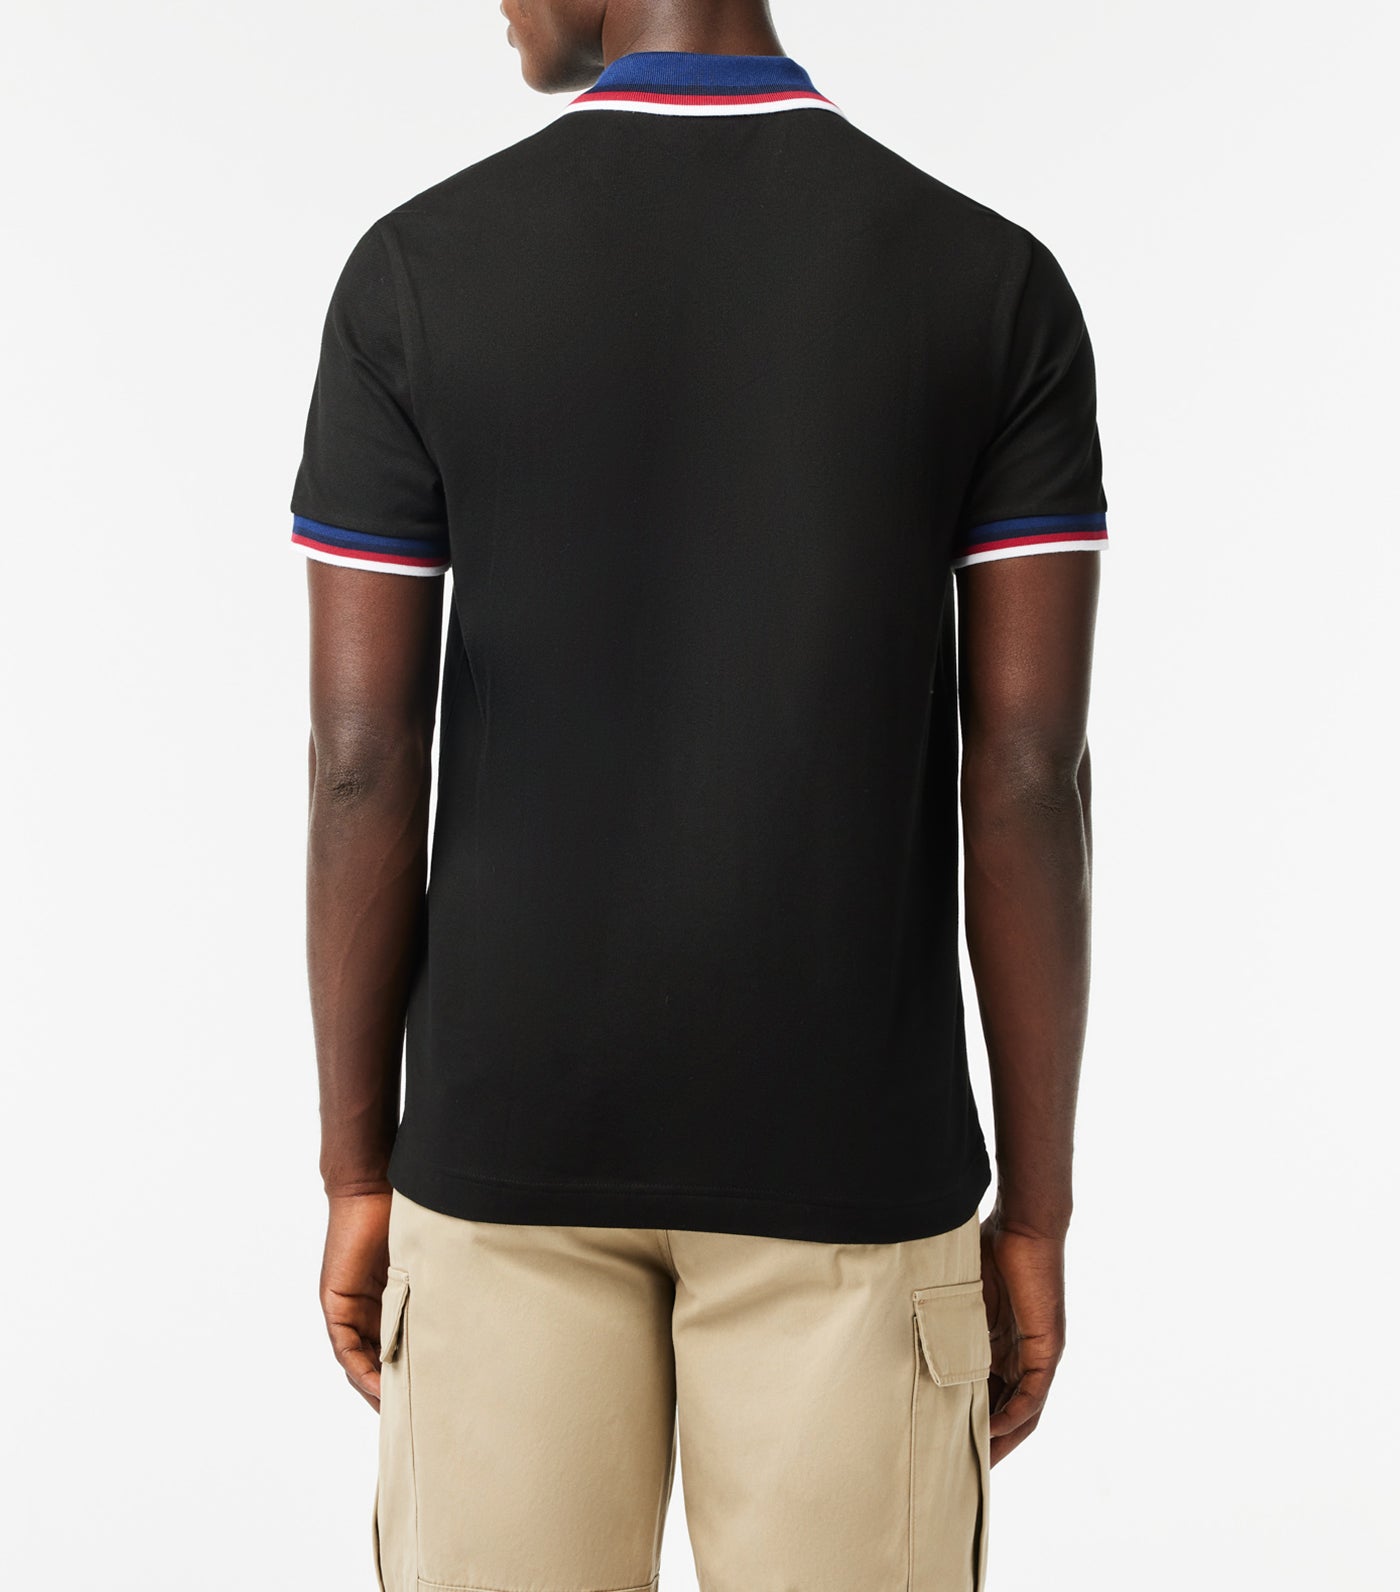 Contrast Collar and Cuff Stretch Polo Shirt Black